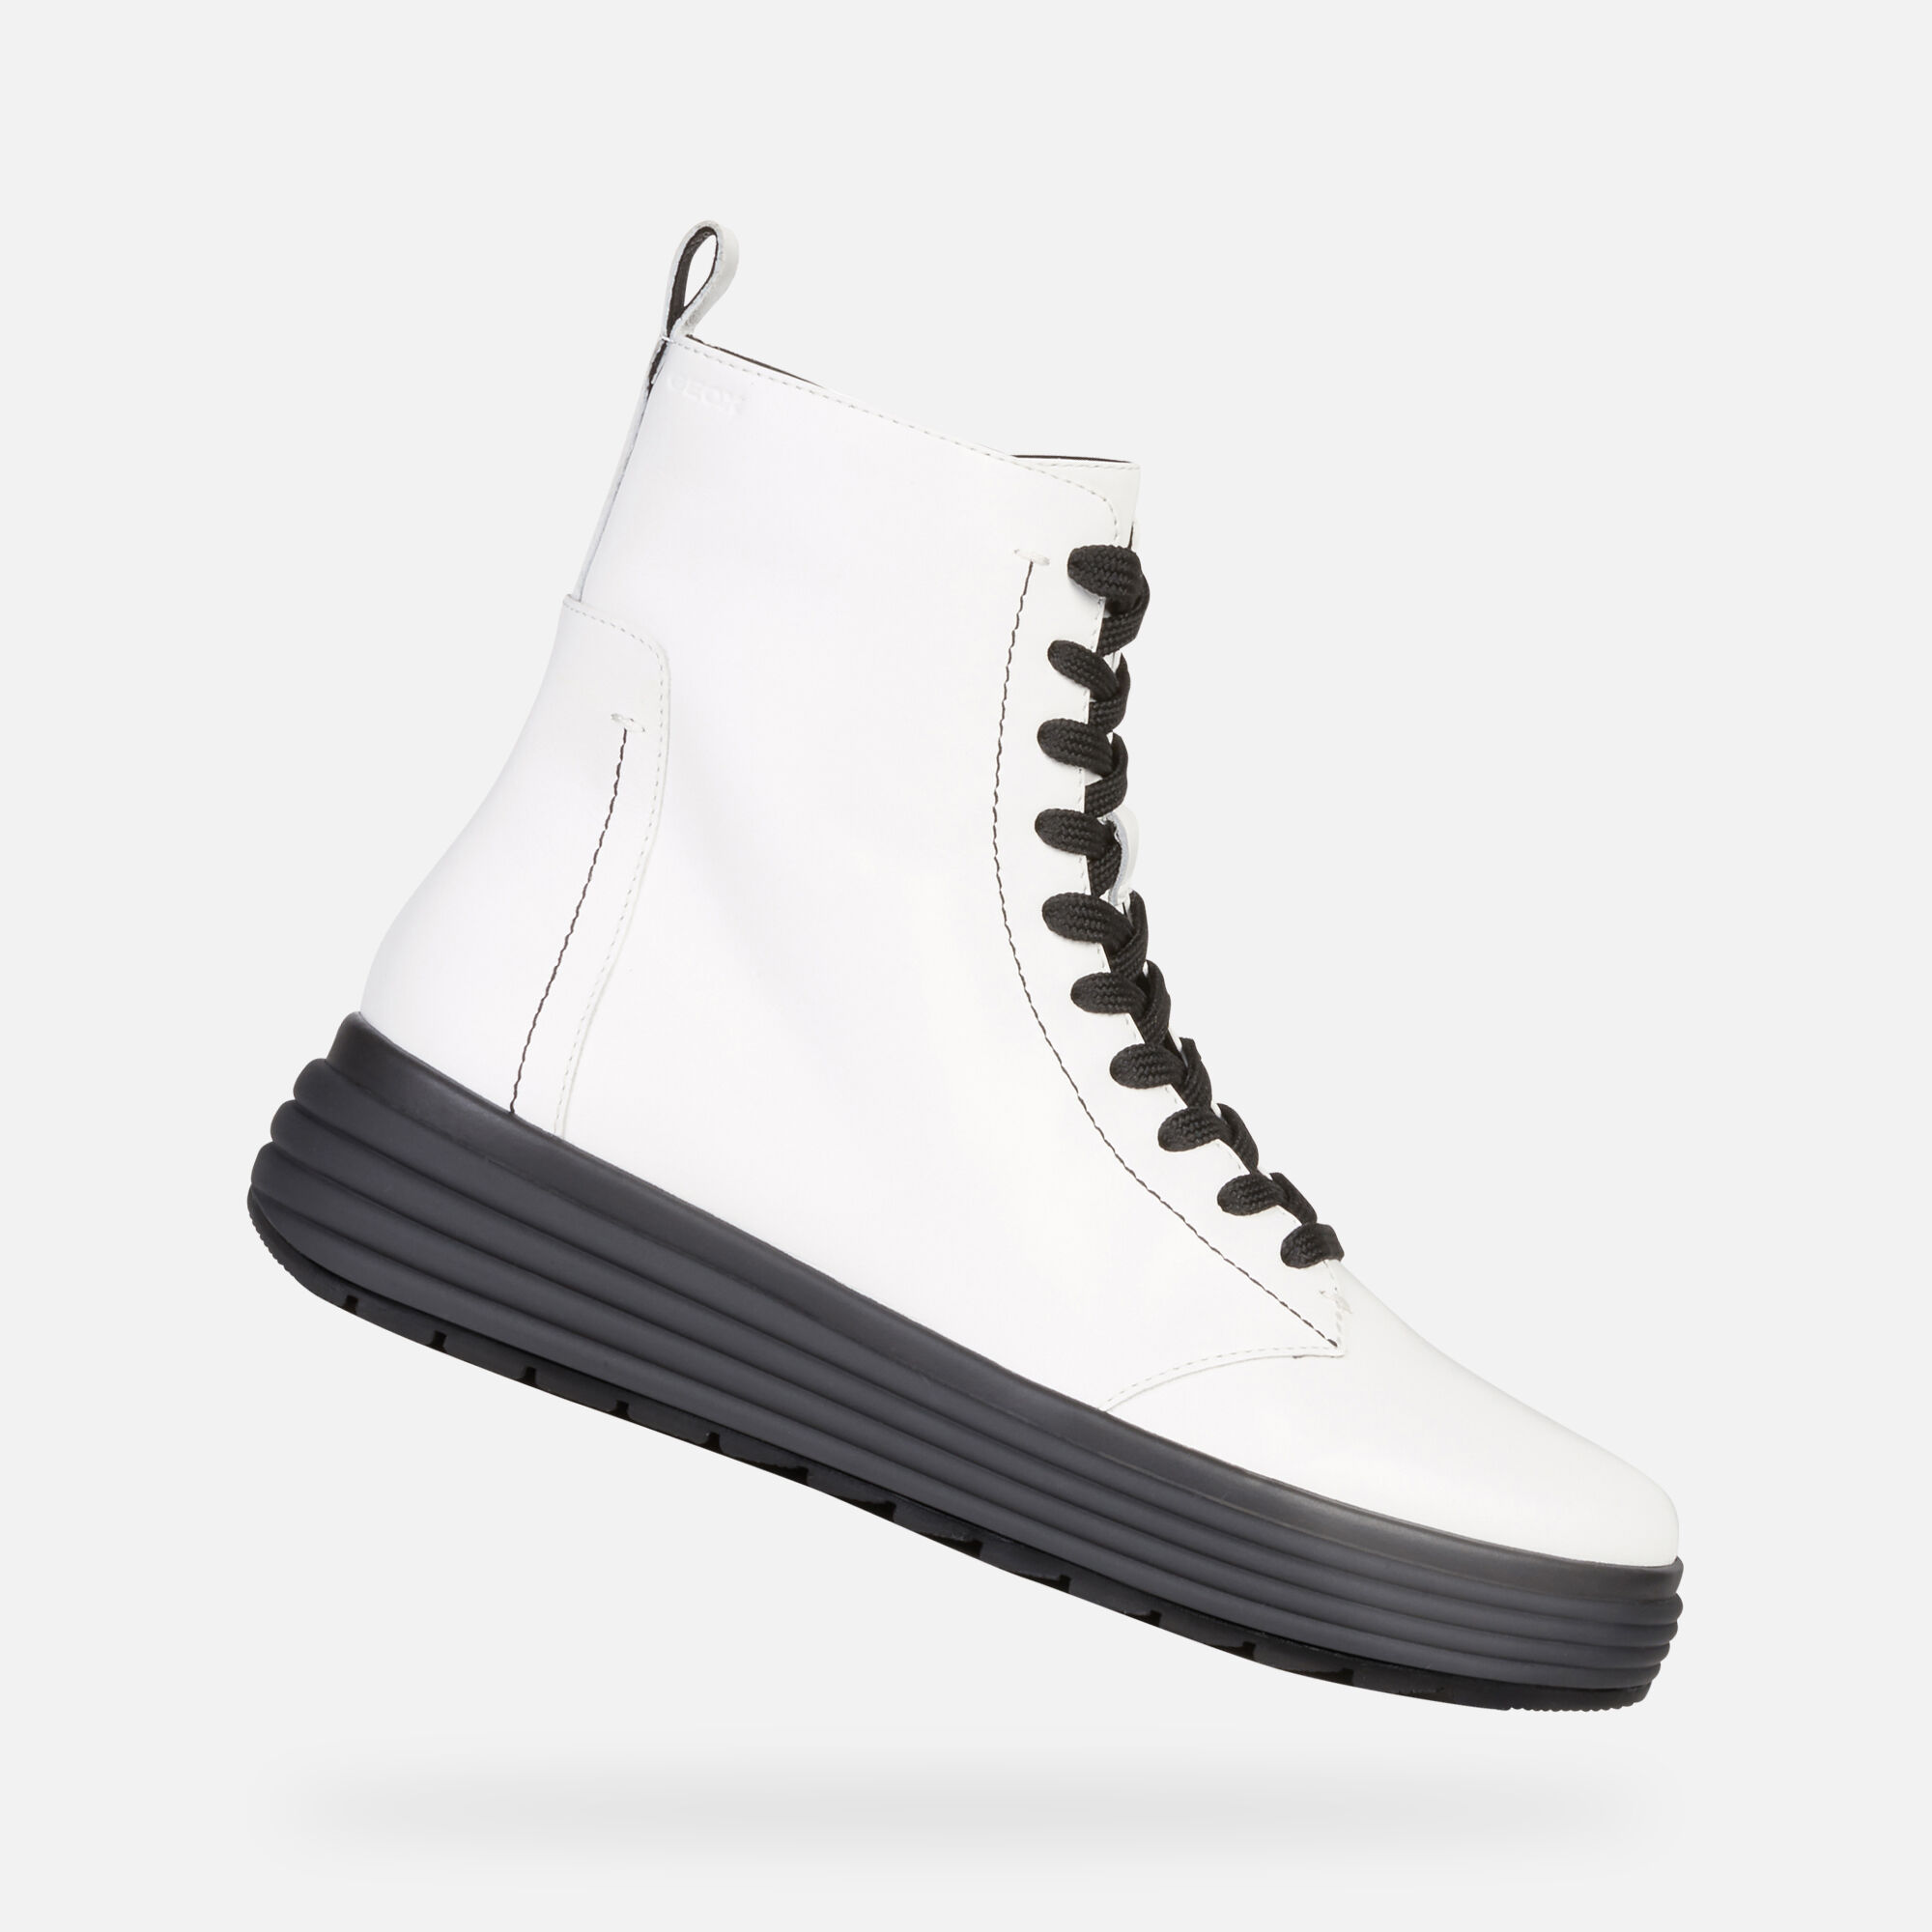 womens white ankle boots